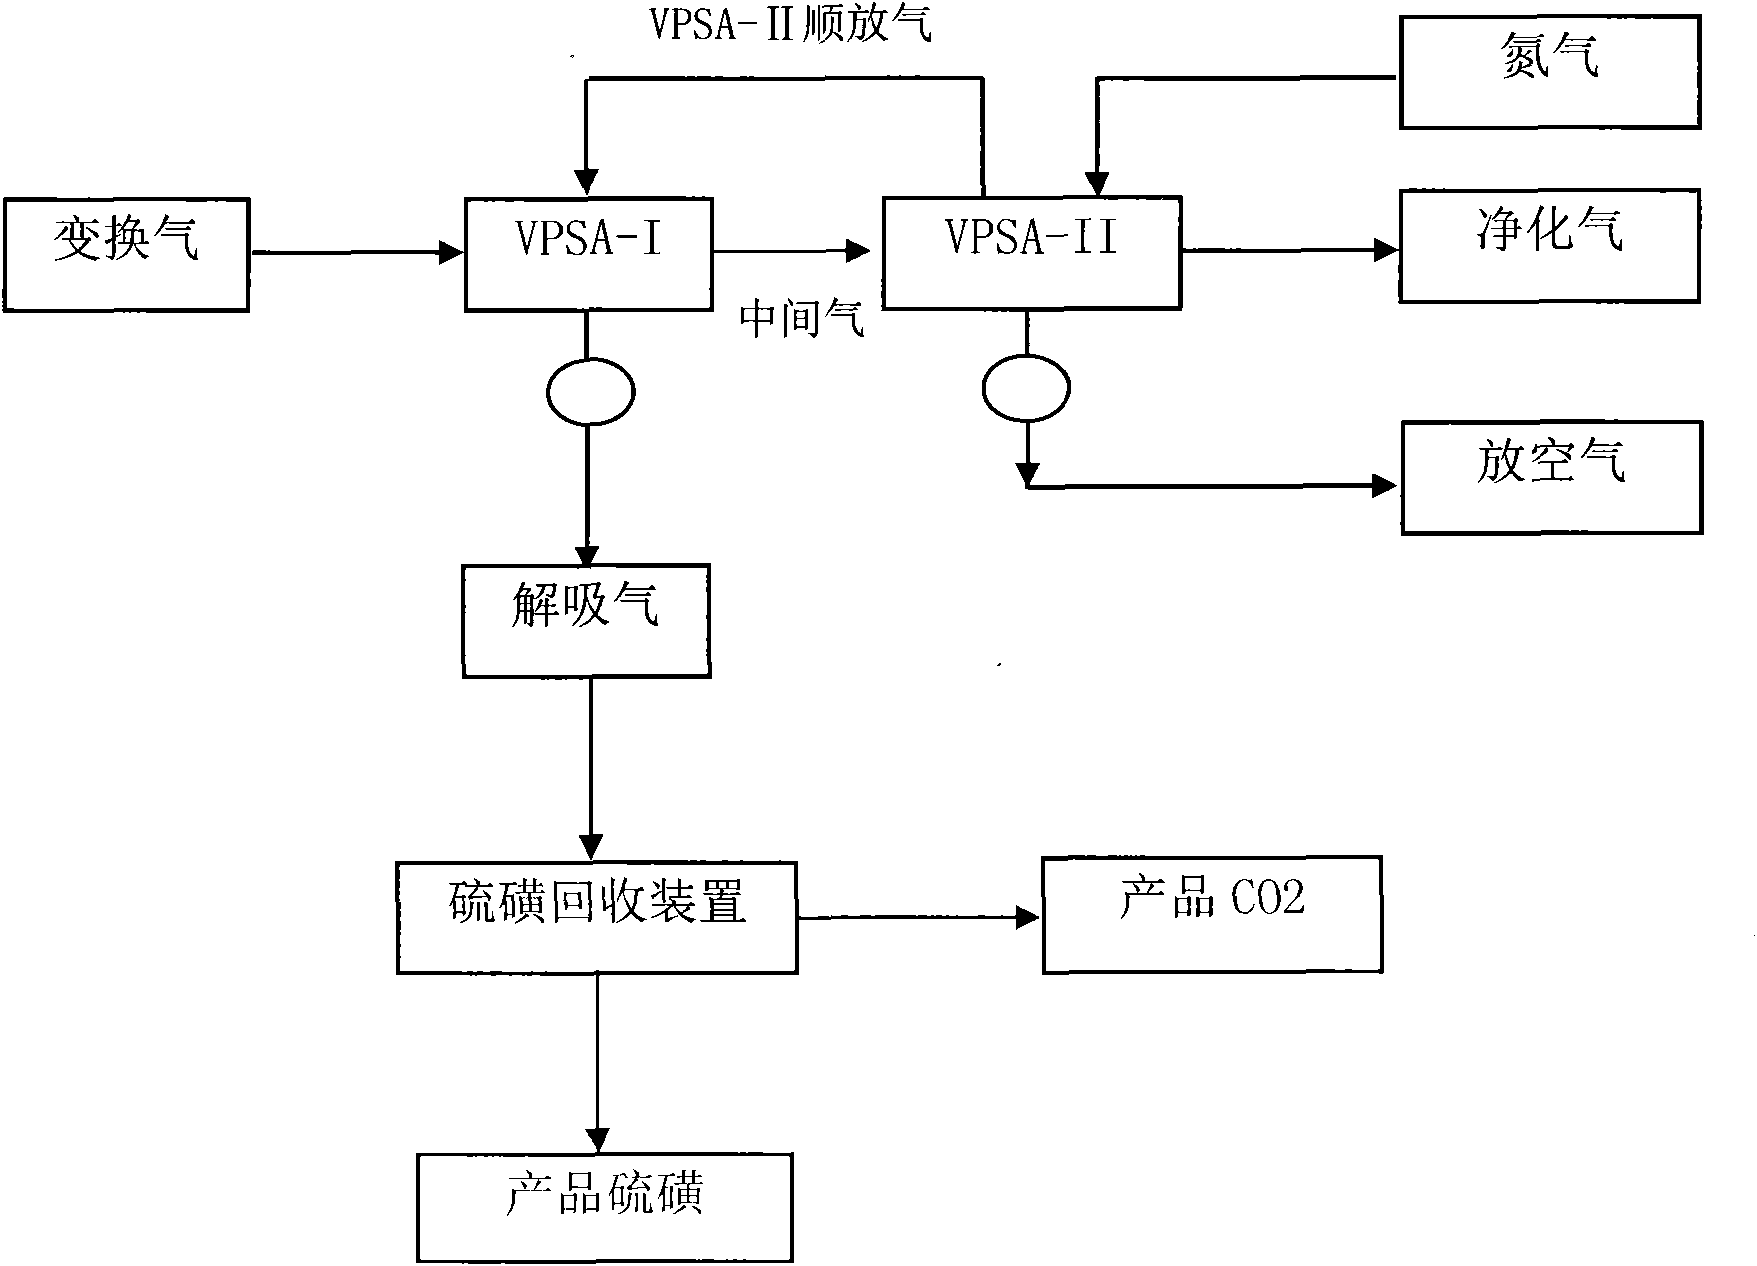 Process flow for removing CO2 and H2S in gas mixture